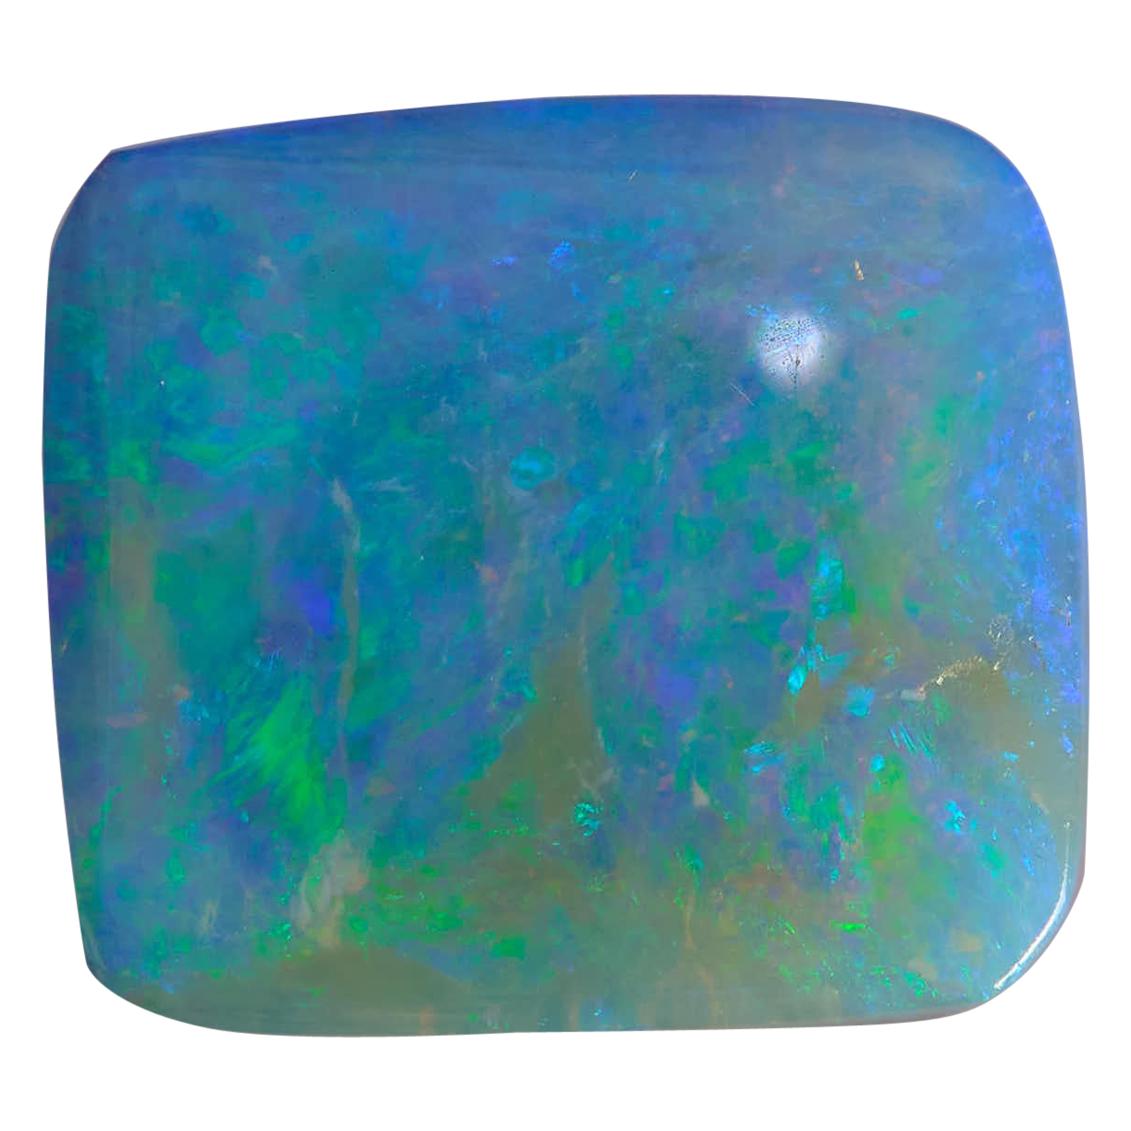 Ethically sourced Australian 1.75 Carat Square Cut Opal Stone for Bespoke Design